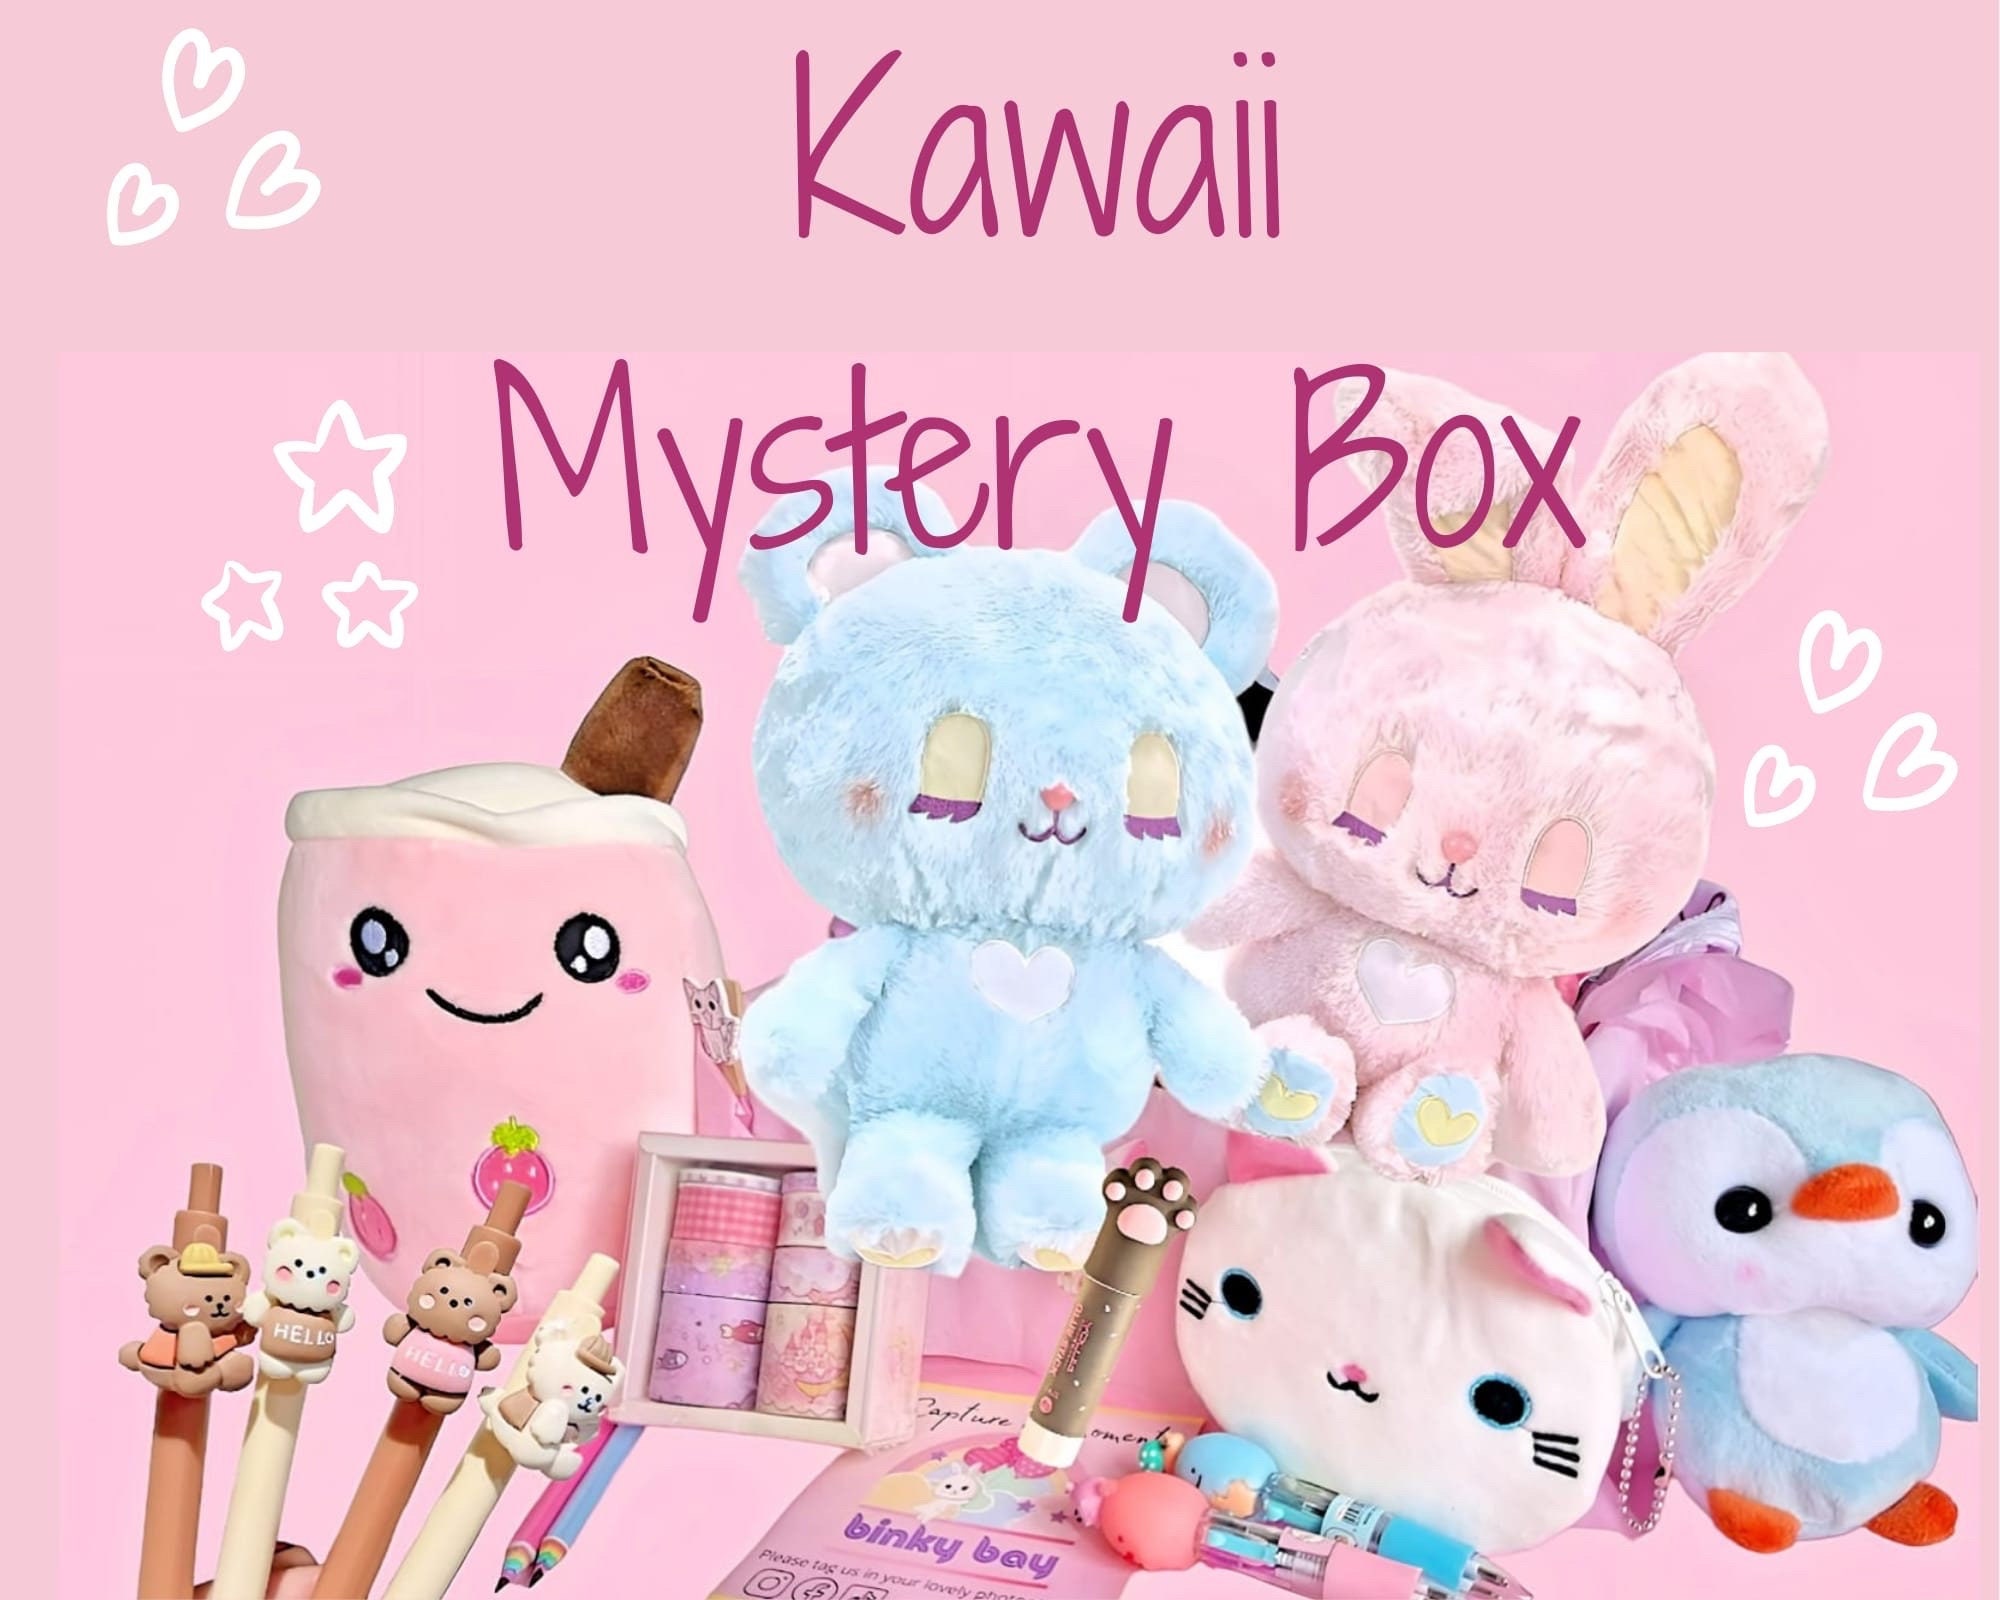 800 Pieces Random NEW STOCK Grab Bag Kawaii Sticker Flakes and Washi  Stickers Journal Penpal Letters Stationery 